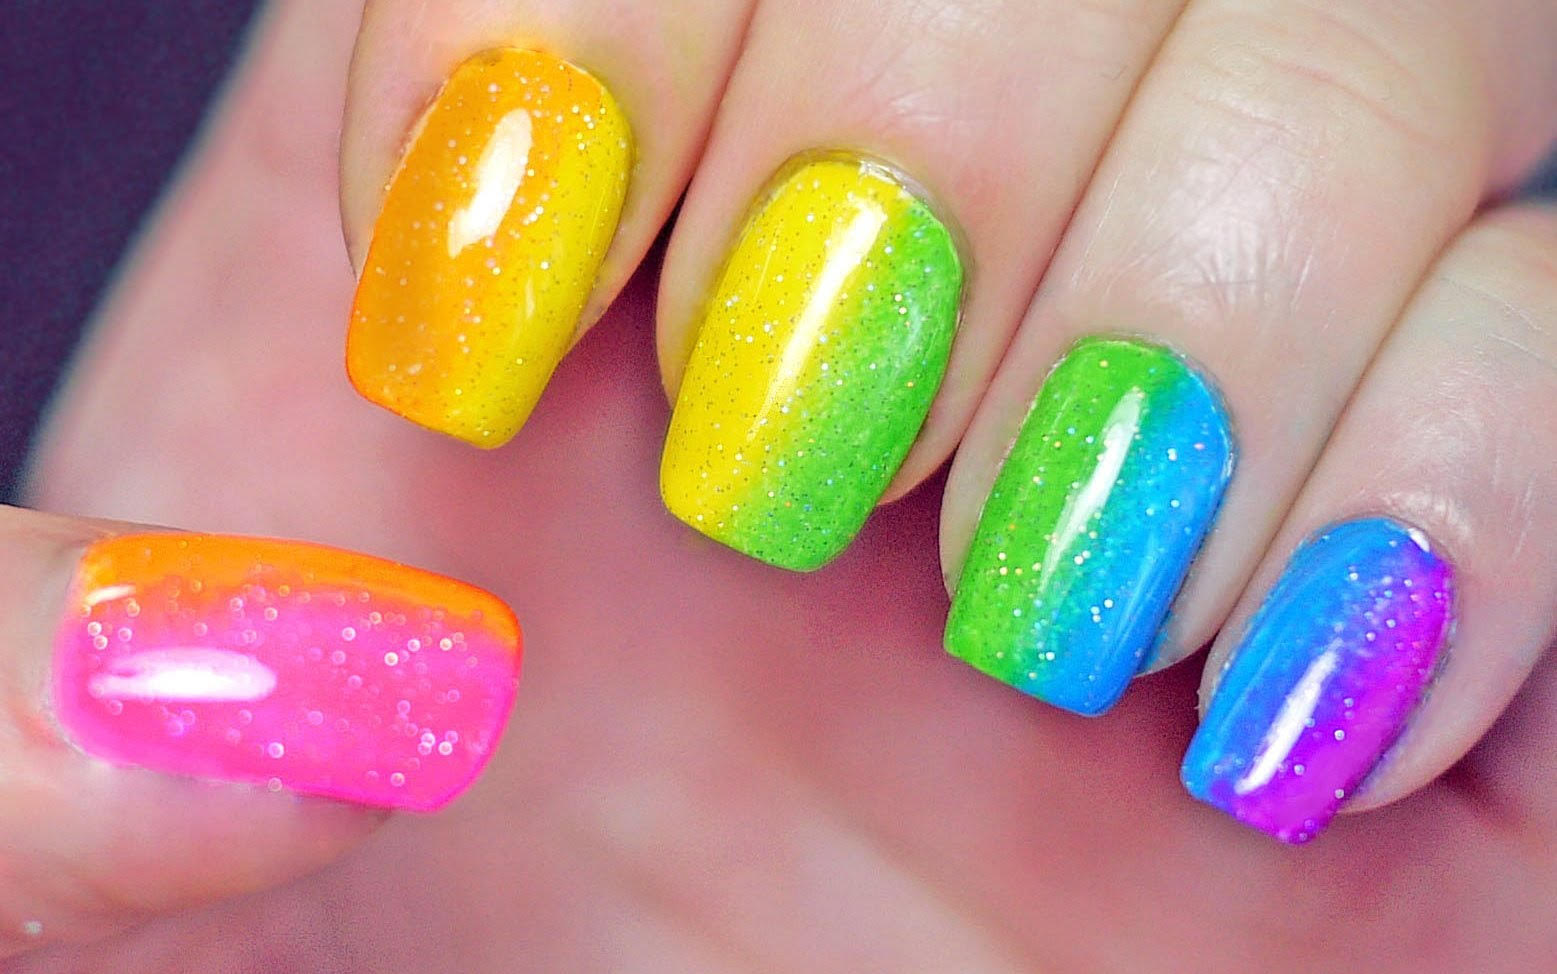 1. "10 Rainbow Nail Art Designs for Beginners" - wide 1